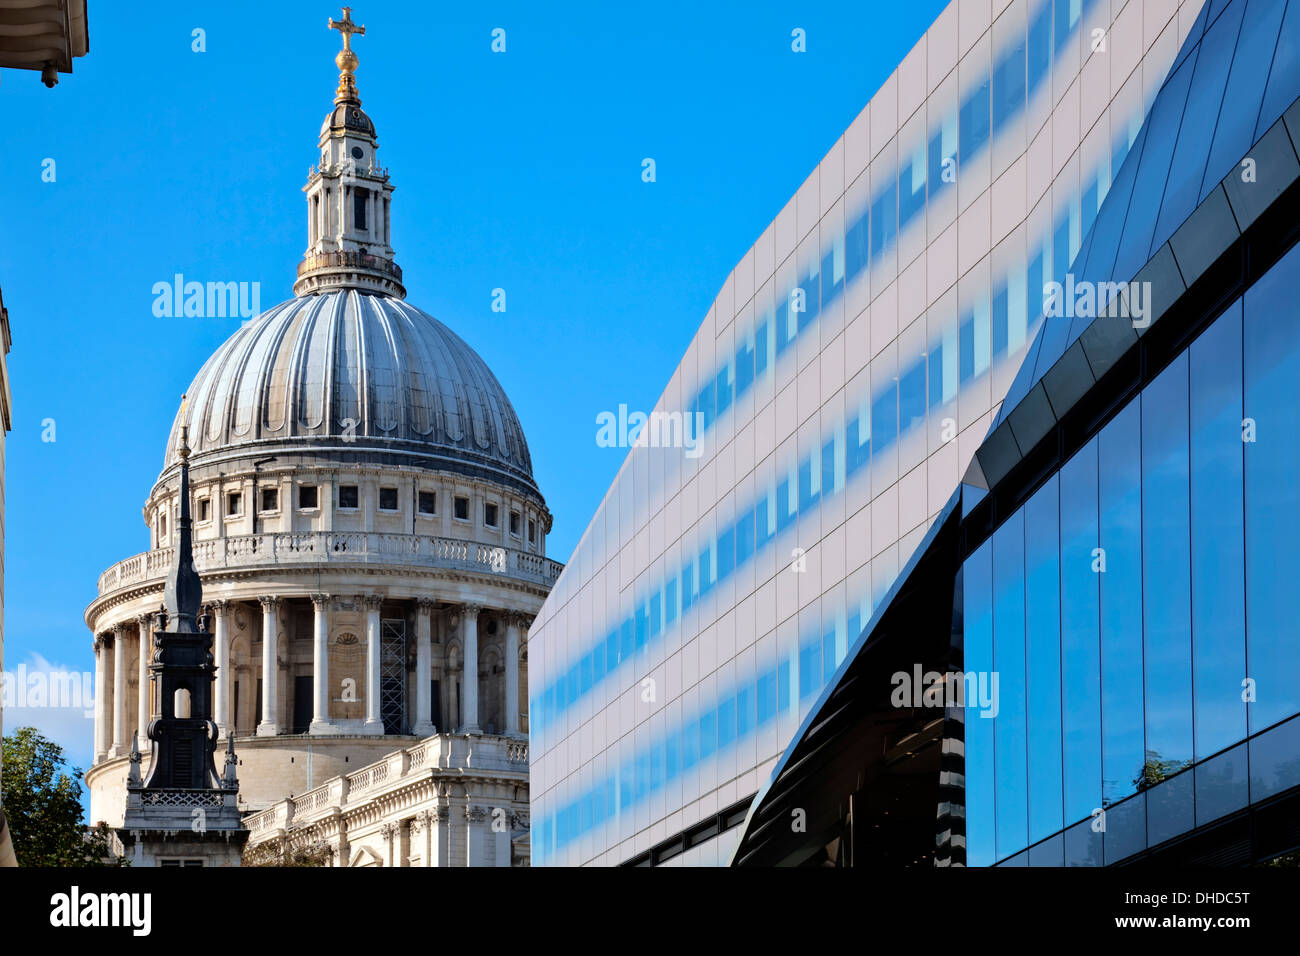 St Paul's Cathedral and One New Change Shopping Centre, London, England Stock Photo